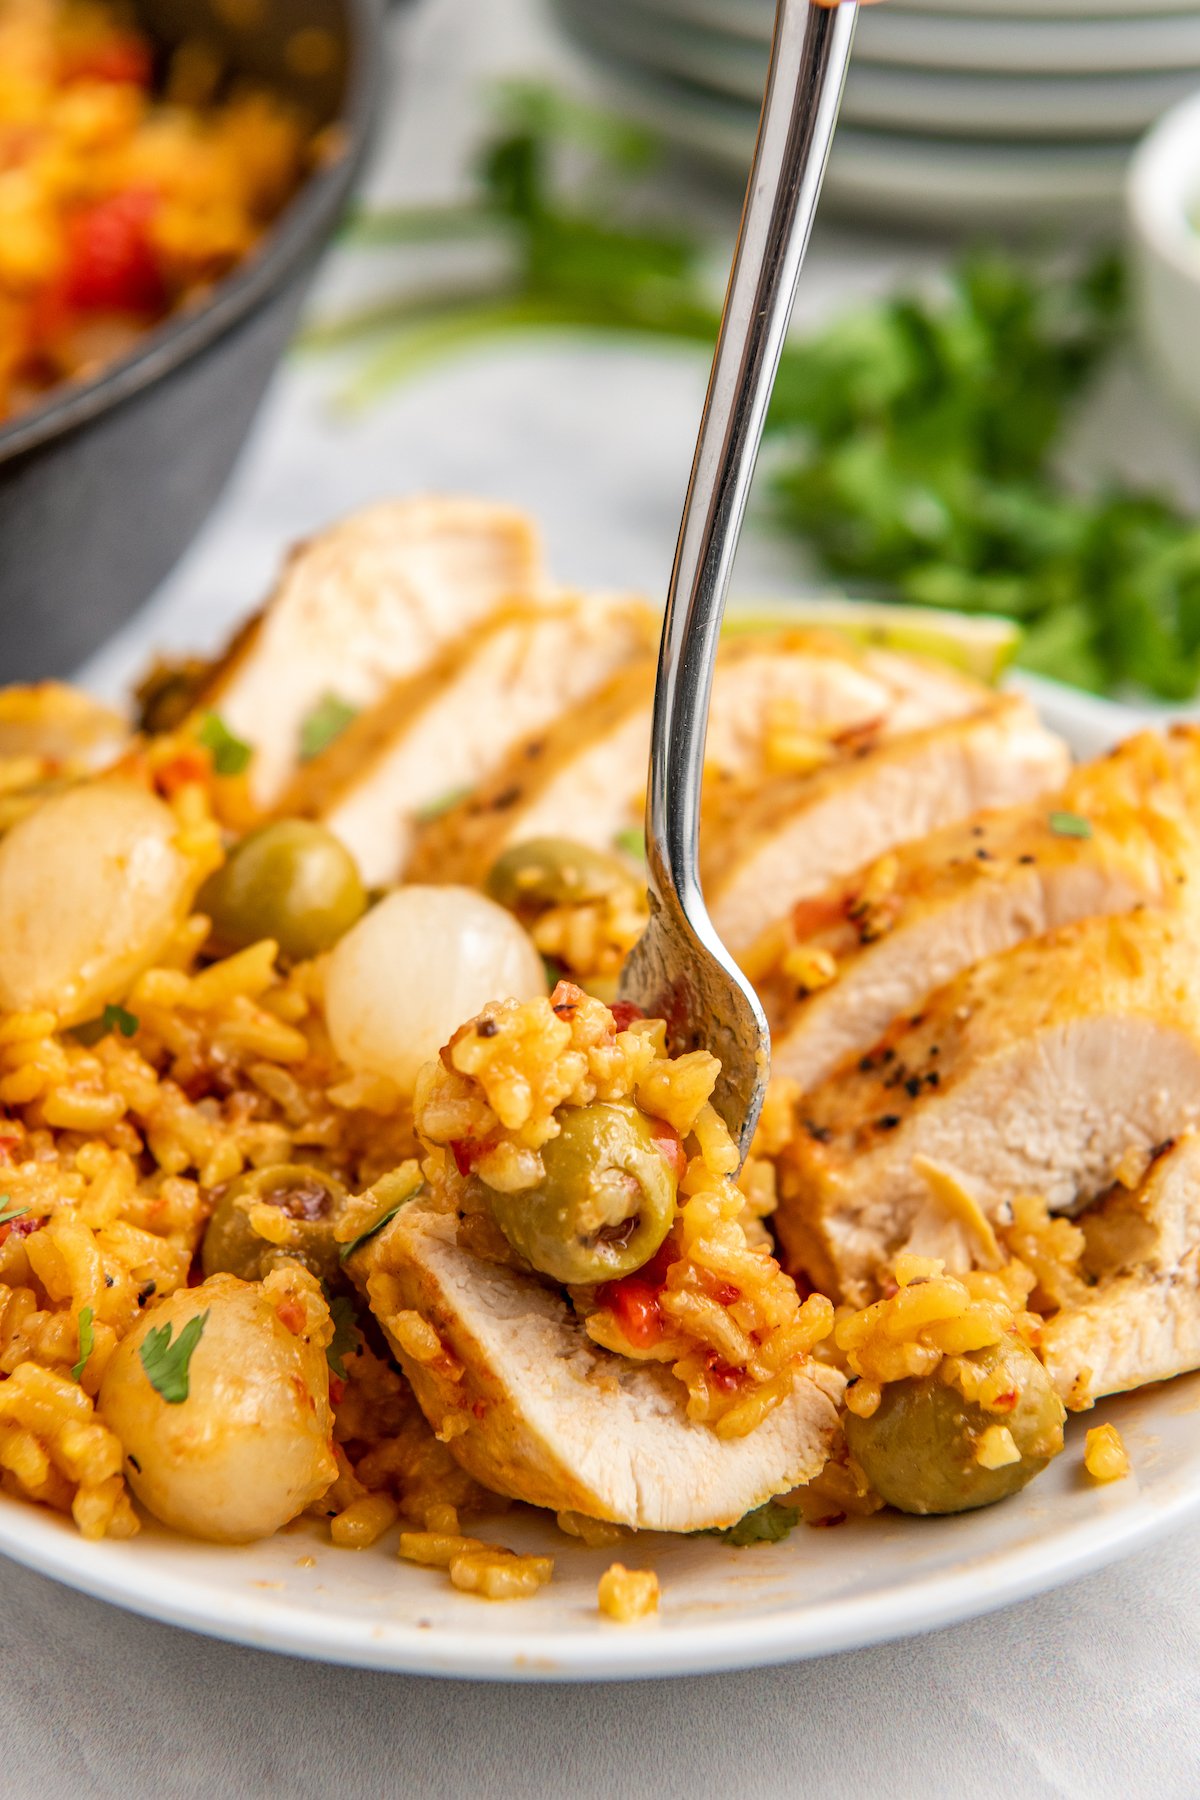 A plate filled with Spanish rice and chicken 